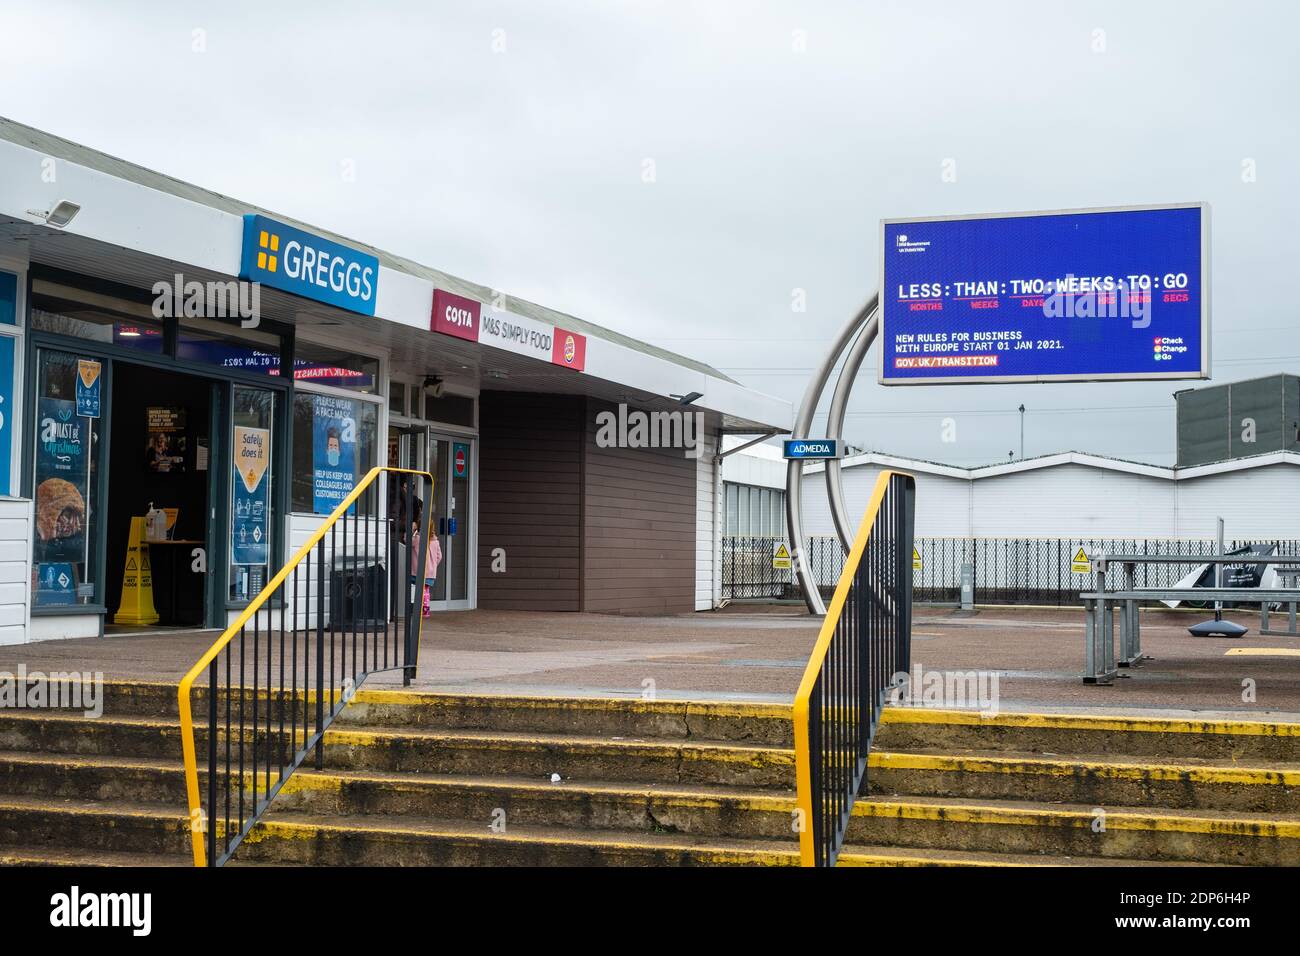 Medway Service Station, Kent, UK. 18th December 2020. A screen displays adverts from the UK government warning road hauliers and drivers on their way to Dover that the Brexit Transition period ends on the 31st December. With less than 2 weeks to go, a deal has still not been finalised between the UK and the EU causing massive uncertainty for business and the public. On the 18th December there was a 6 hour queue for lorries trying to leave ports at Dover. Stock Photo